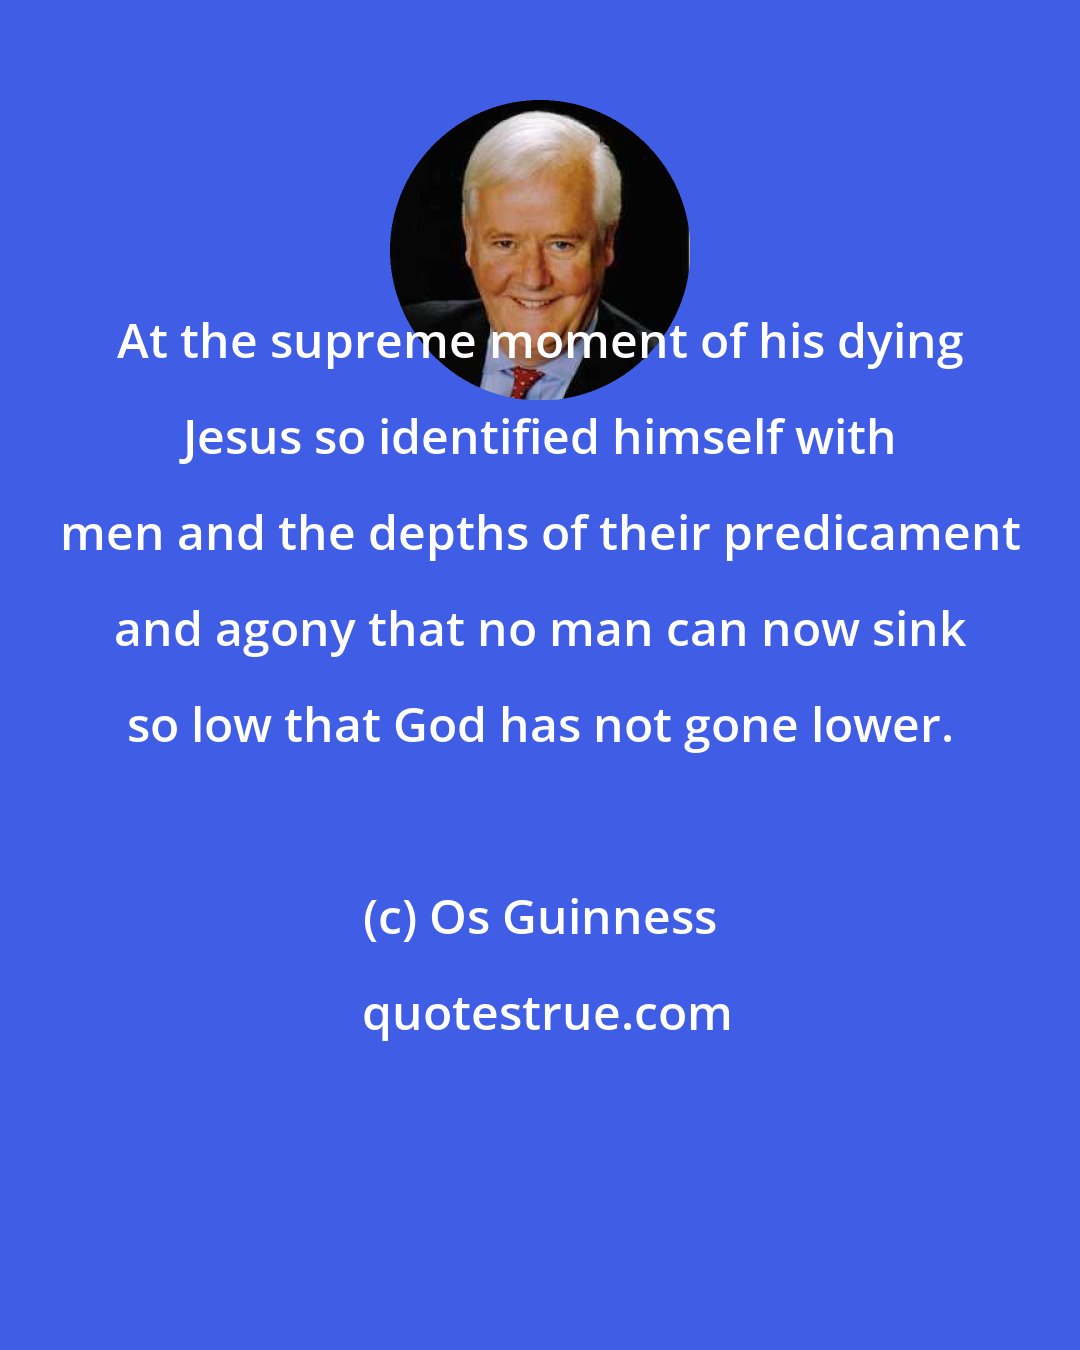 Os Guinness: At the supreme moment of his dying Jesus so identified himself with men and the depths of their predicament and agony that no man can now sink so low that God has not gone lower.